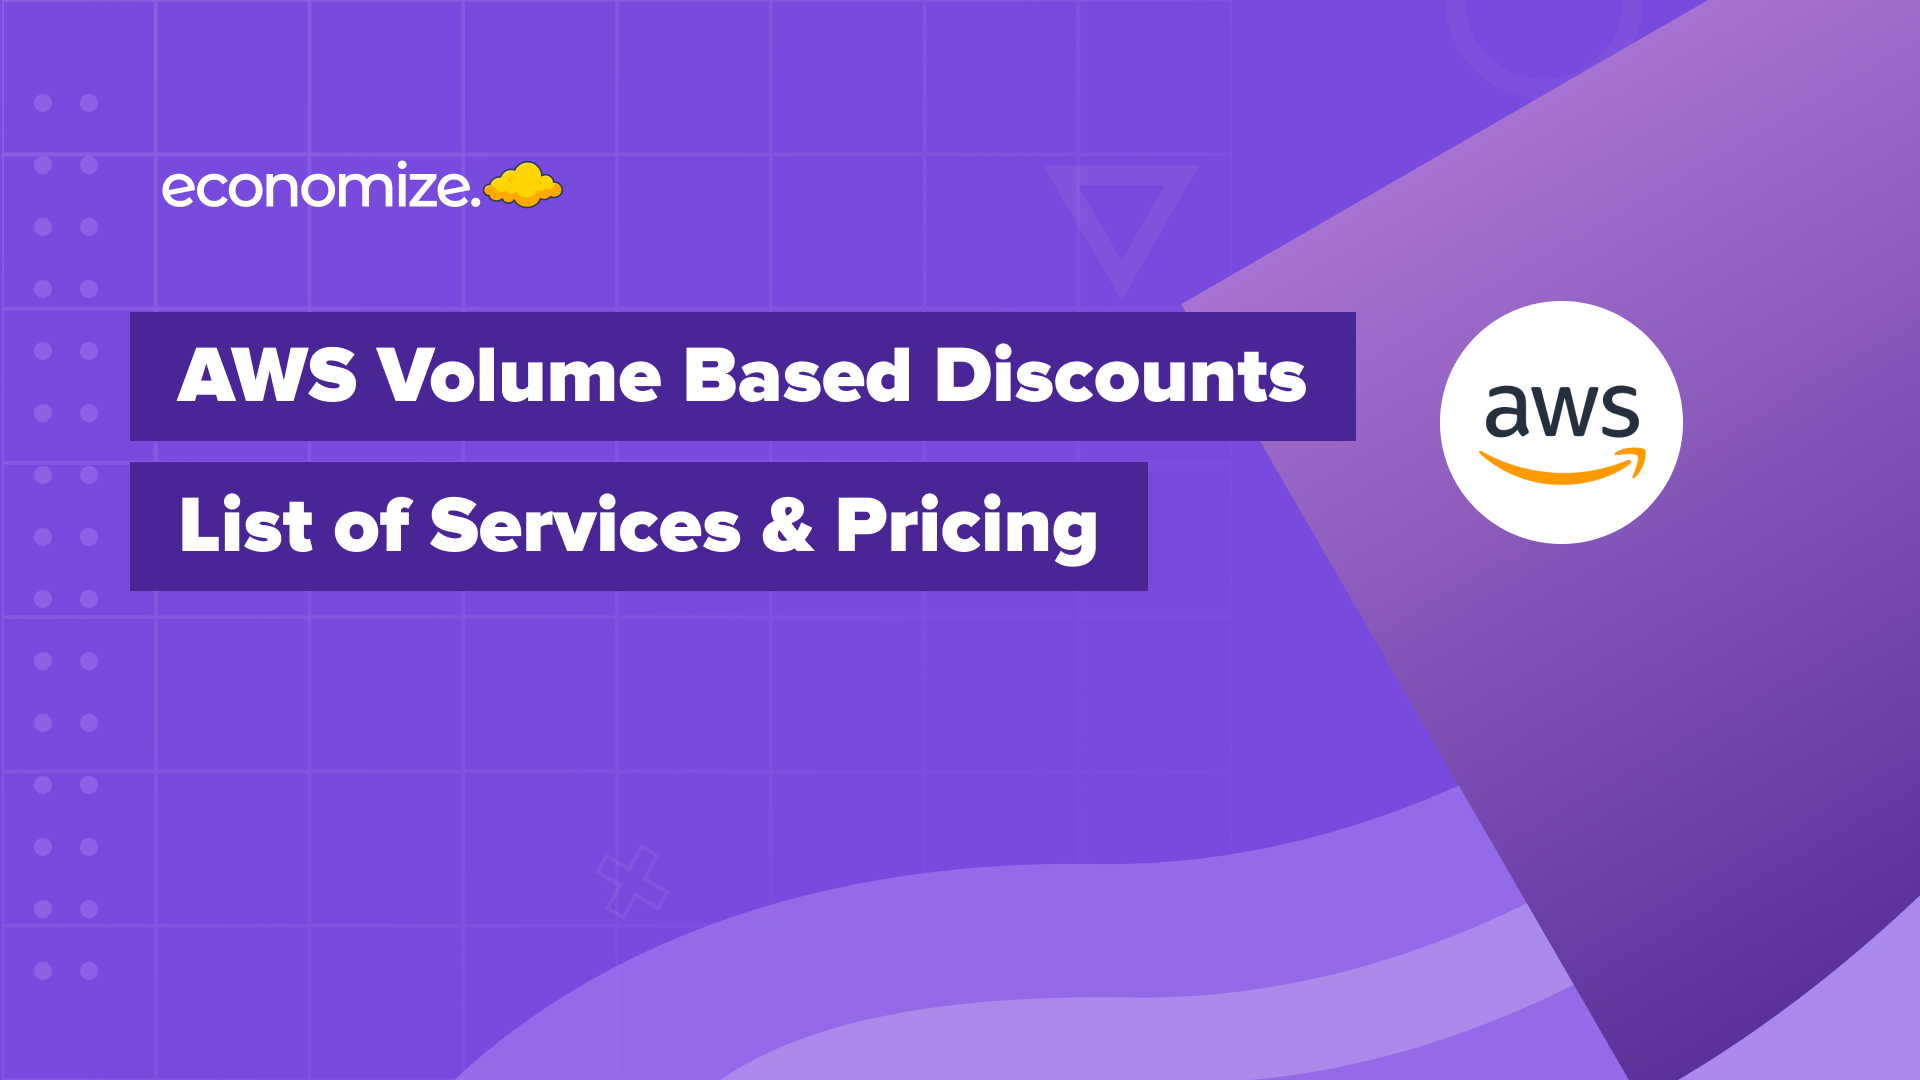 AWS Volume Based Discounts, Services List, Pricing